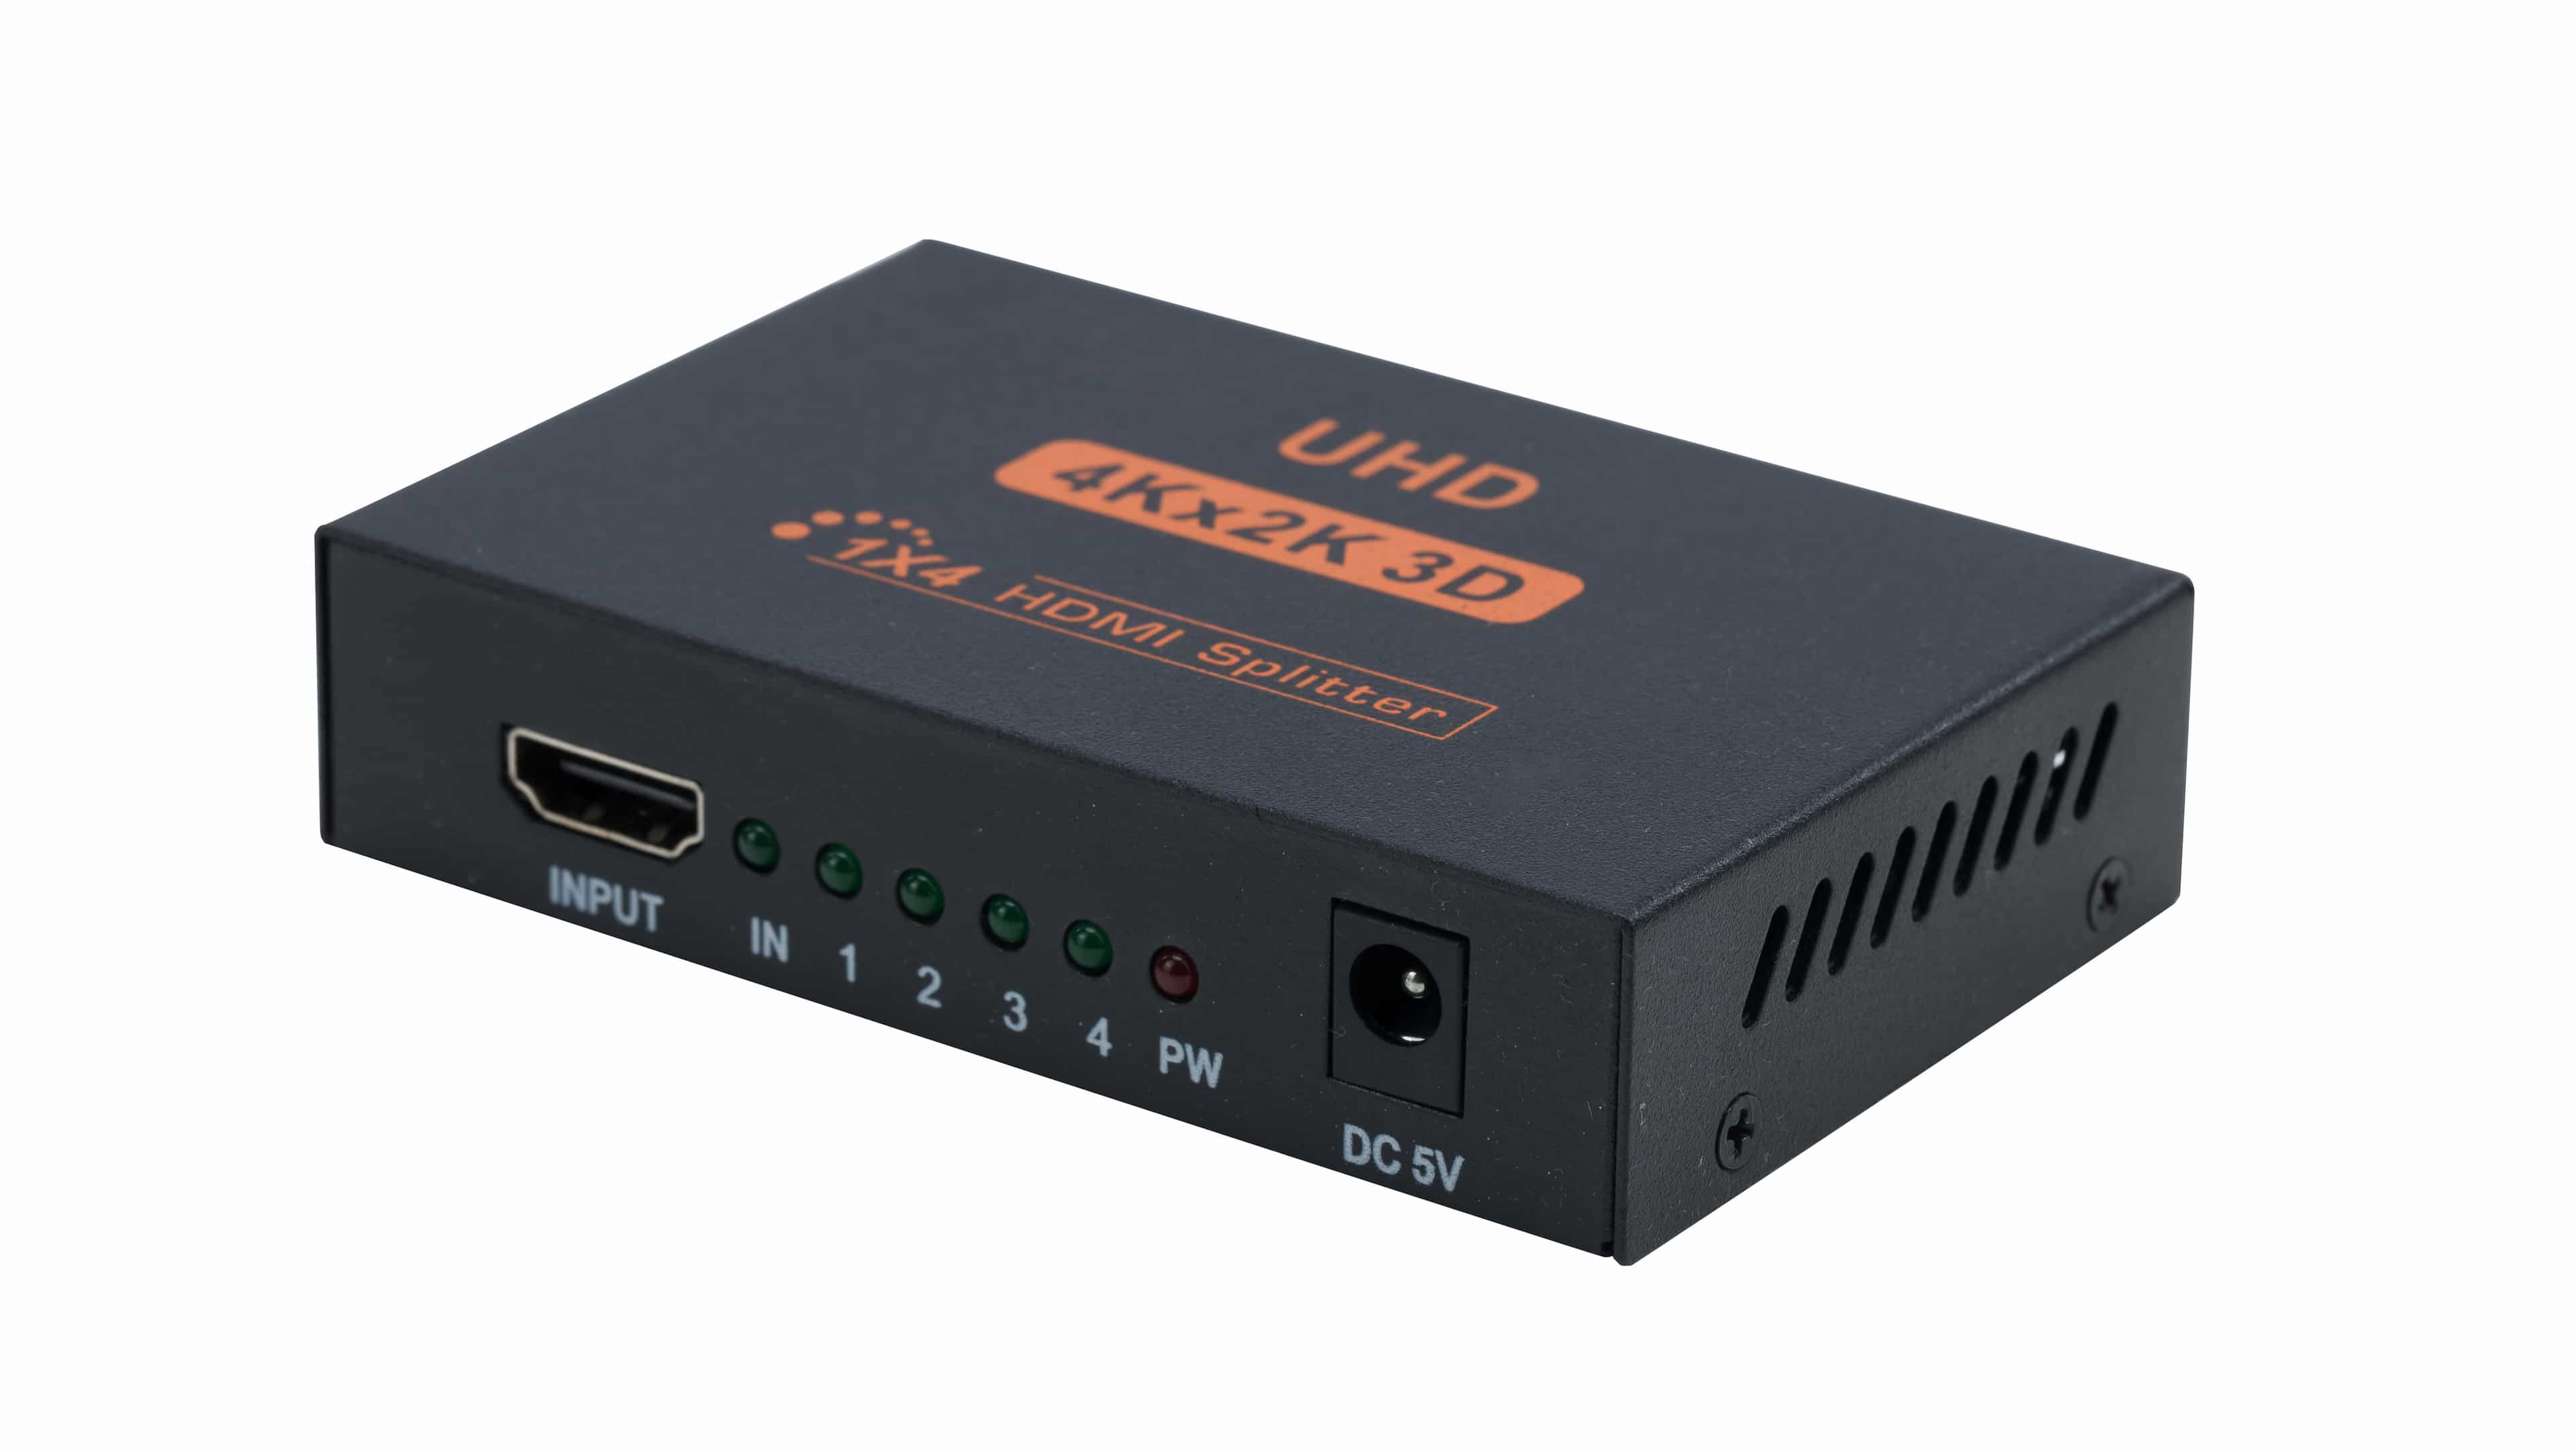 Generic-HDMI-Splitter-with-4-Output-Ports-and-1-Input-Port-image_2